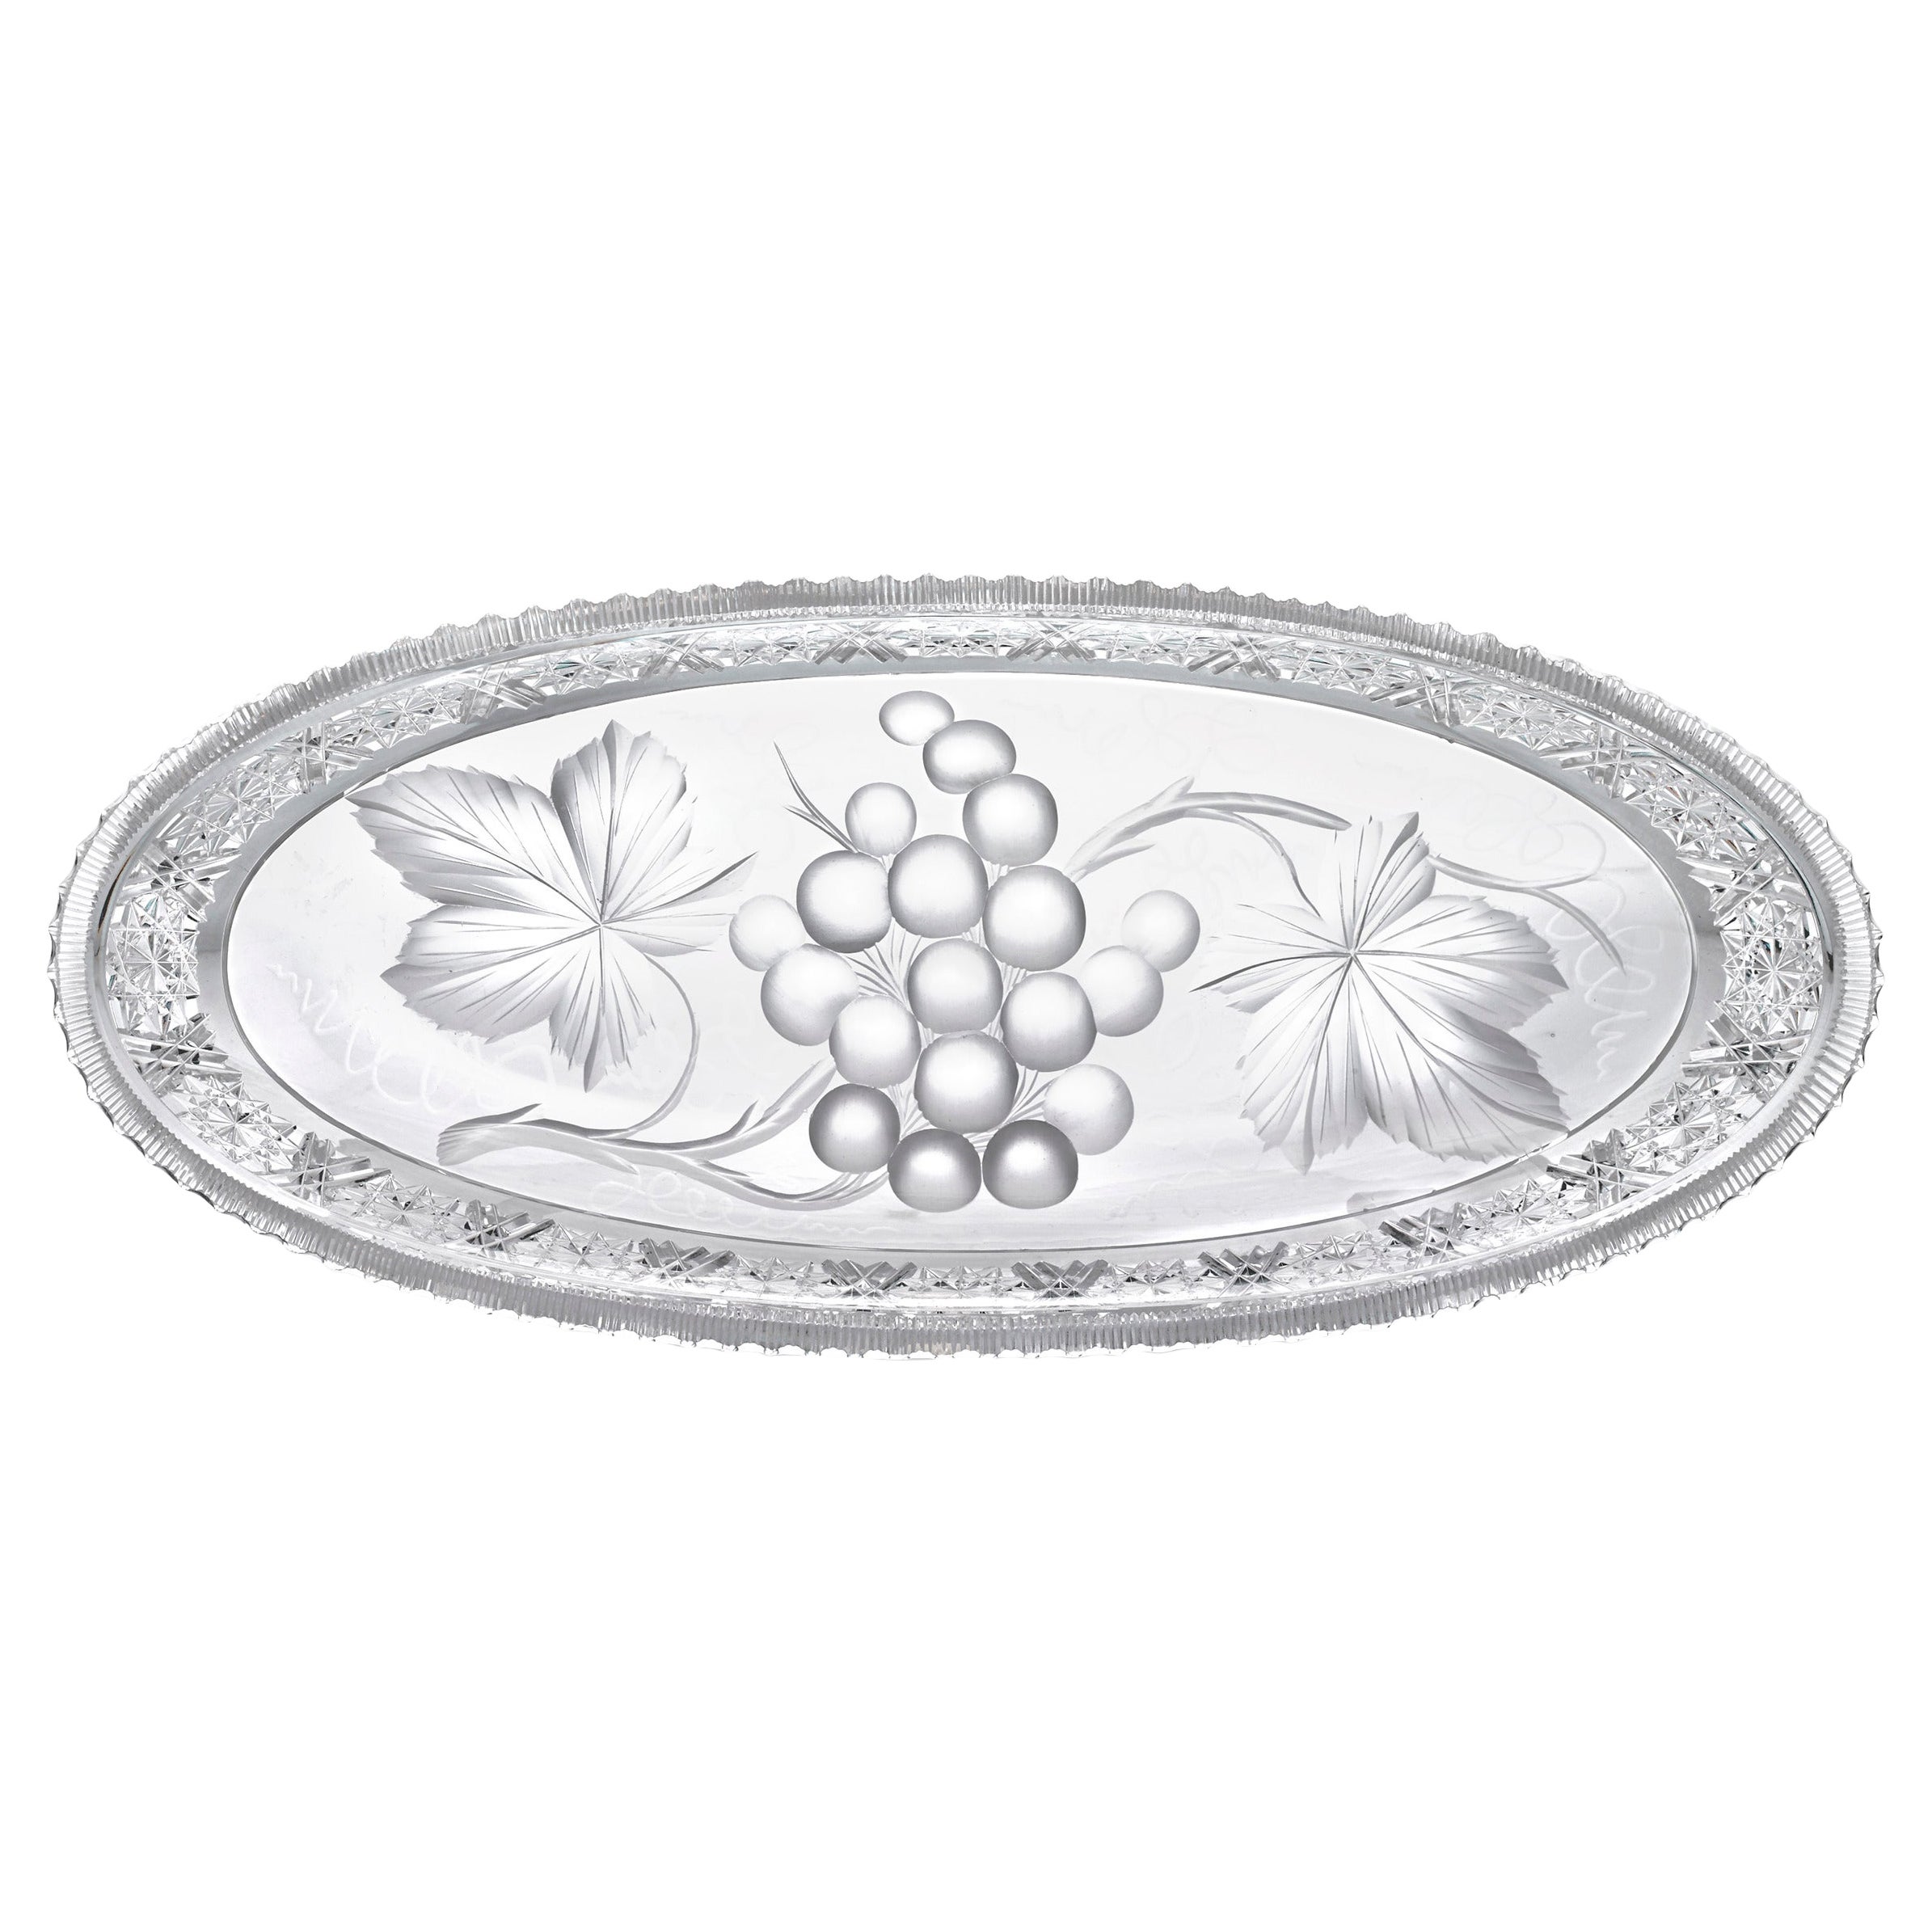 Tuthill Cut Glass Celery Tray